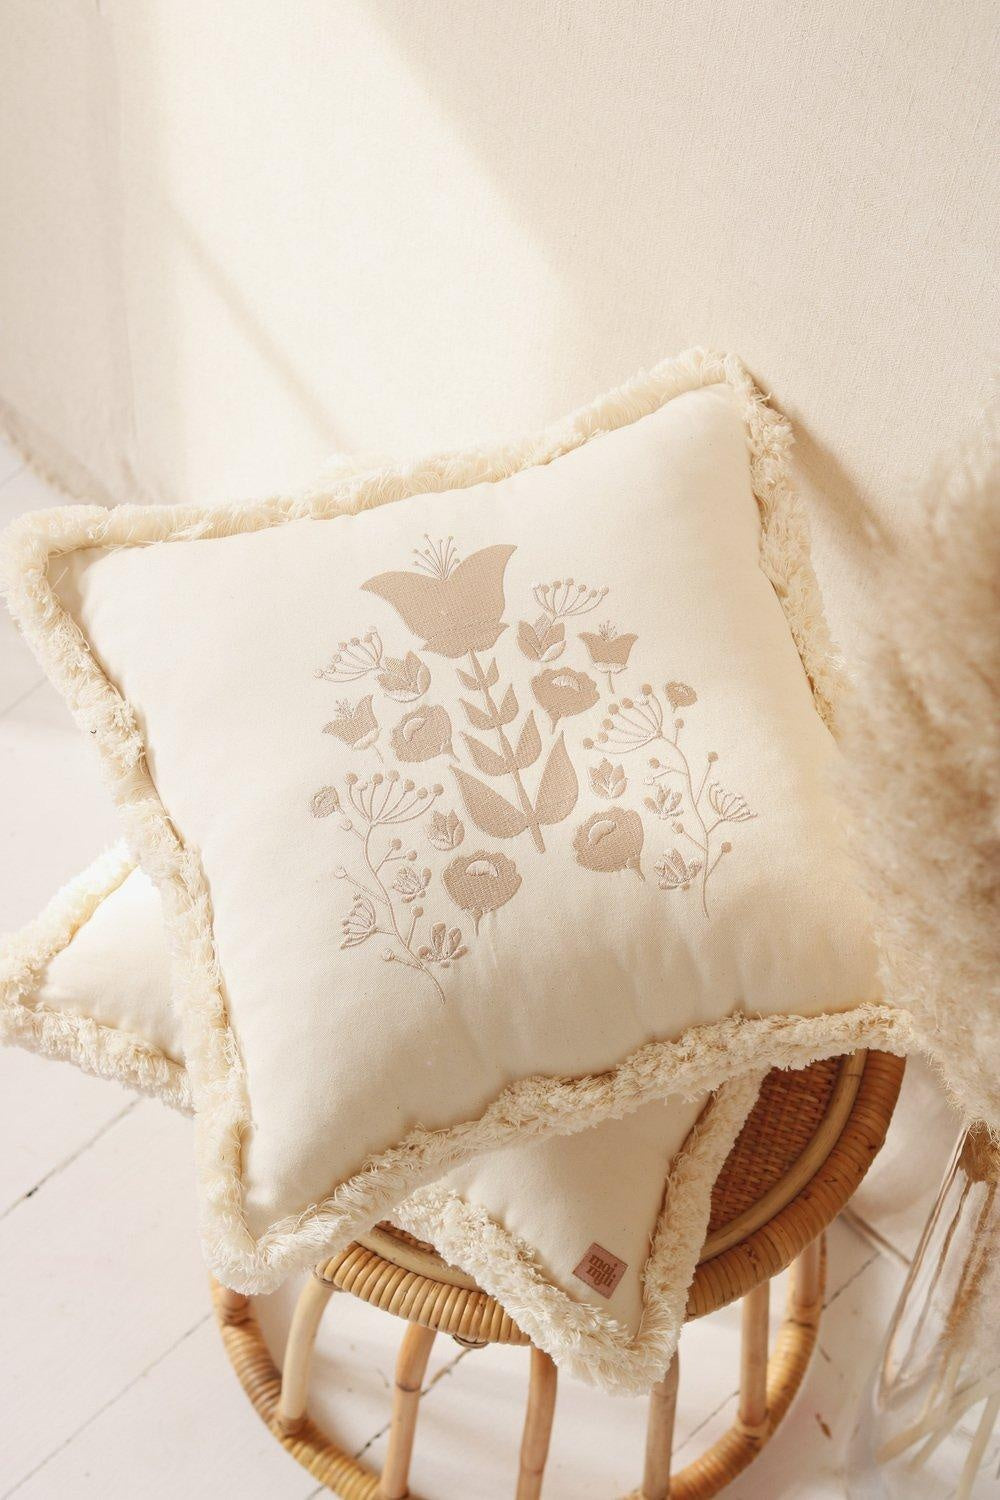 “Boho” Pillow with Embroidery by Moi Mili